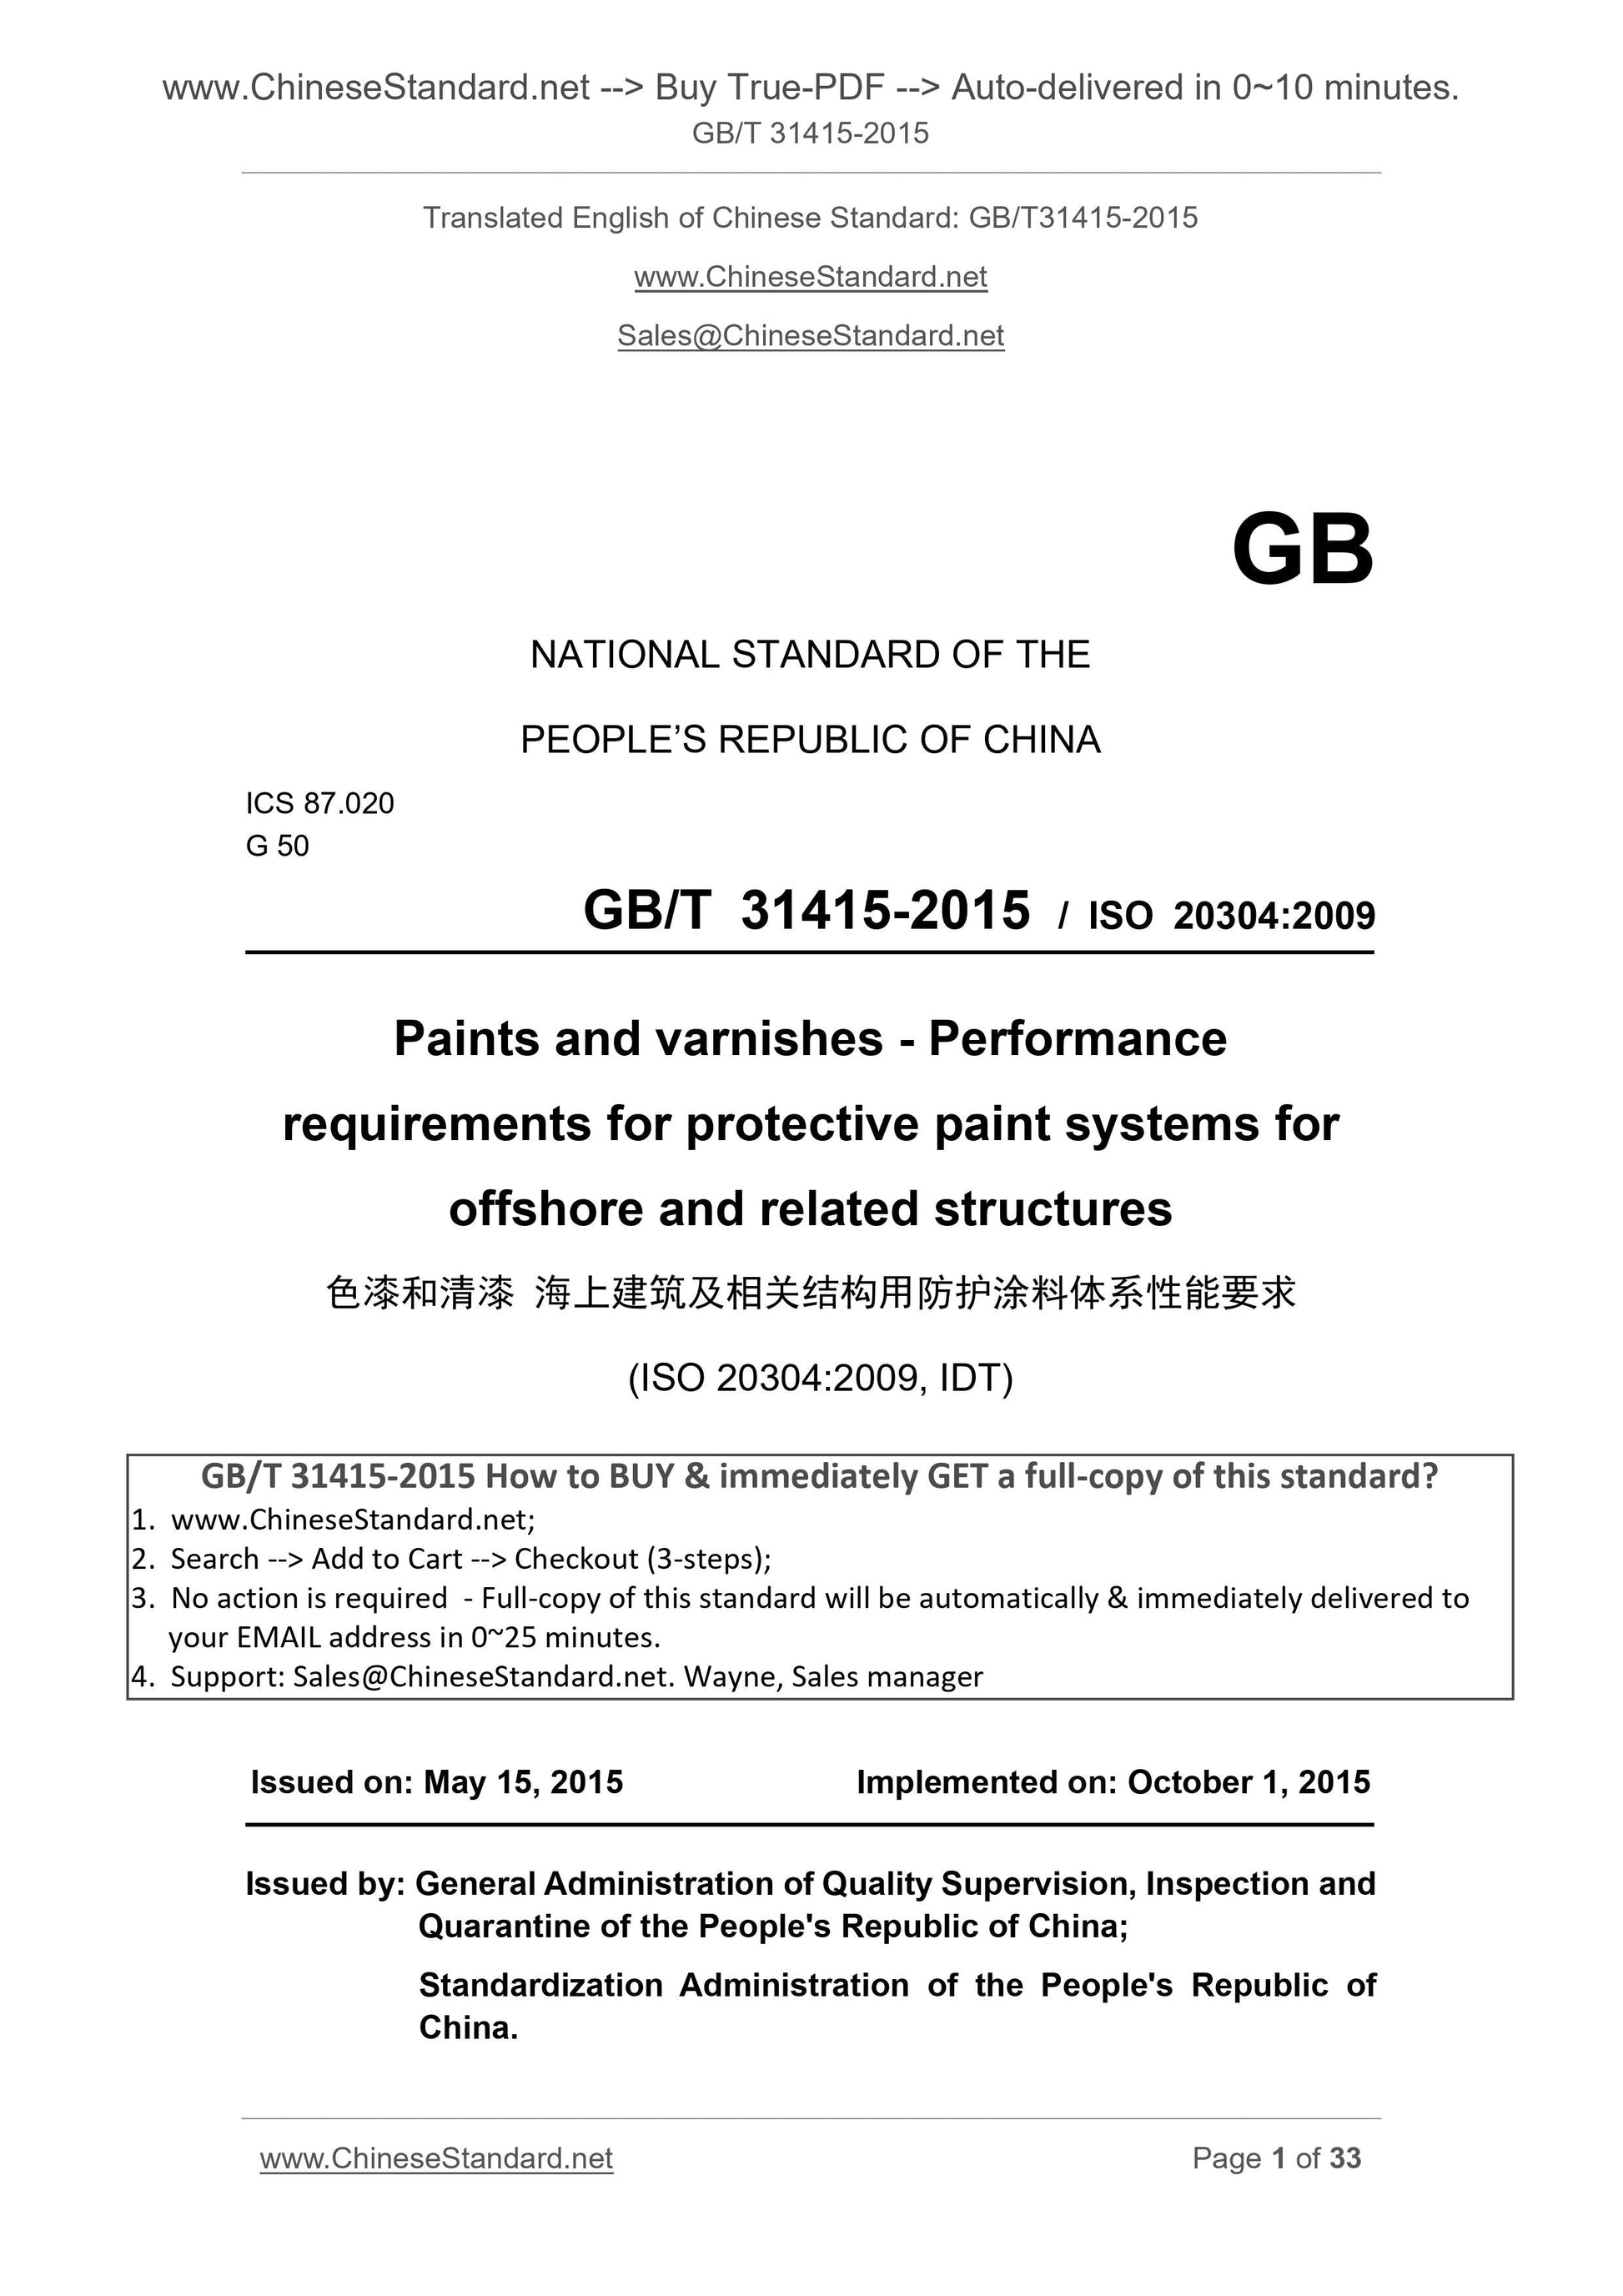 GB/T 31415-2015 Page 1